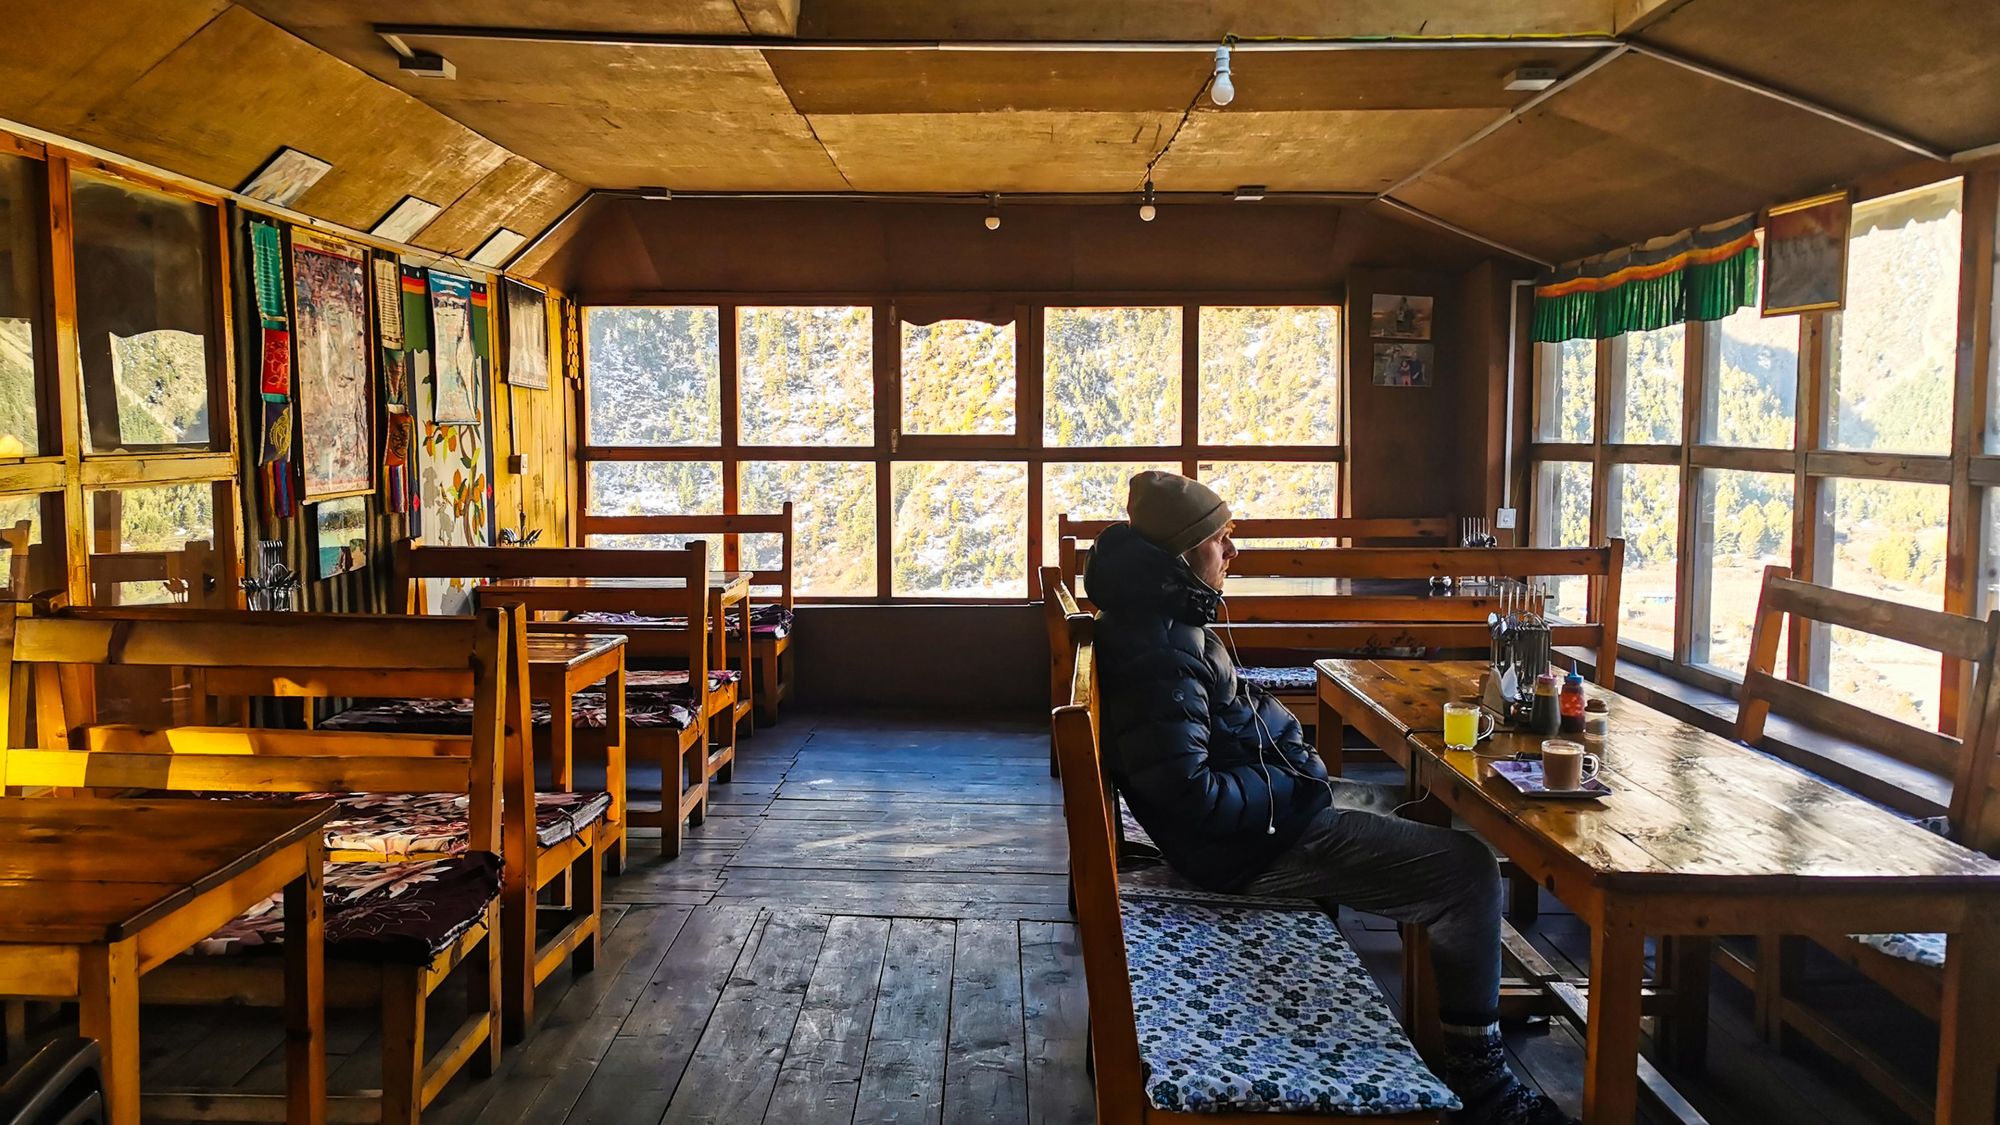 A classic dining hall in one of the teahouses of Nepal. Photo: Josh Edwards